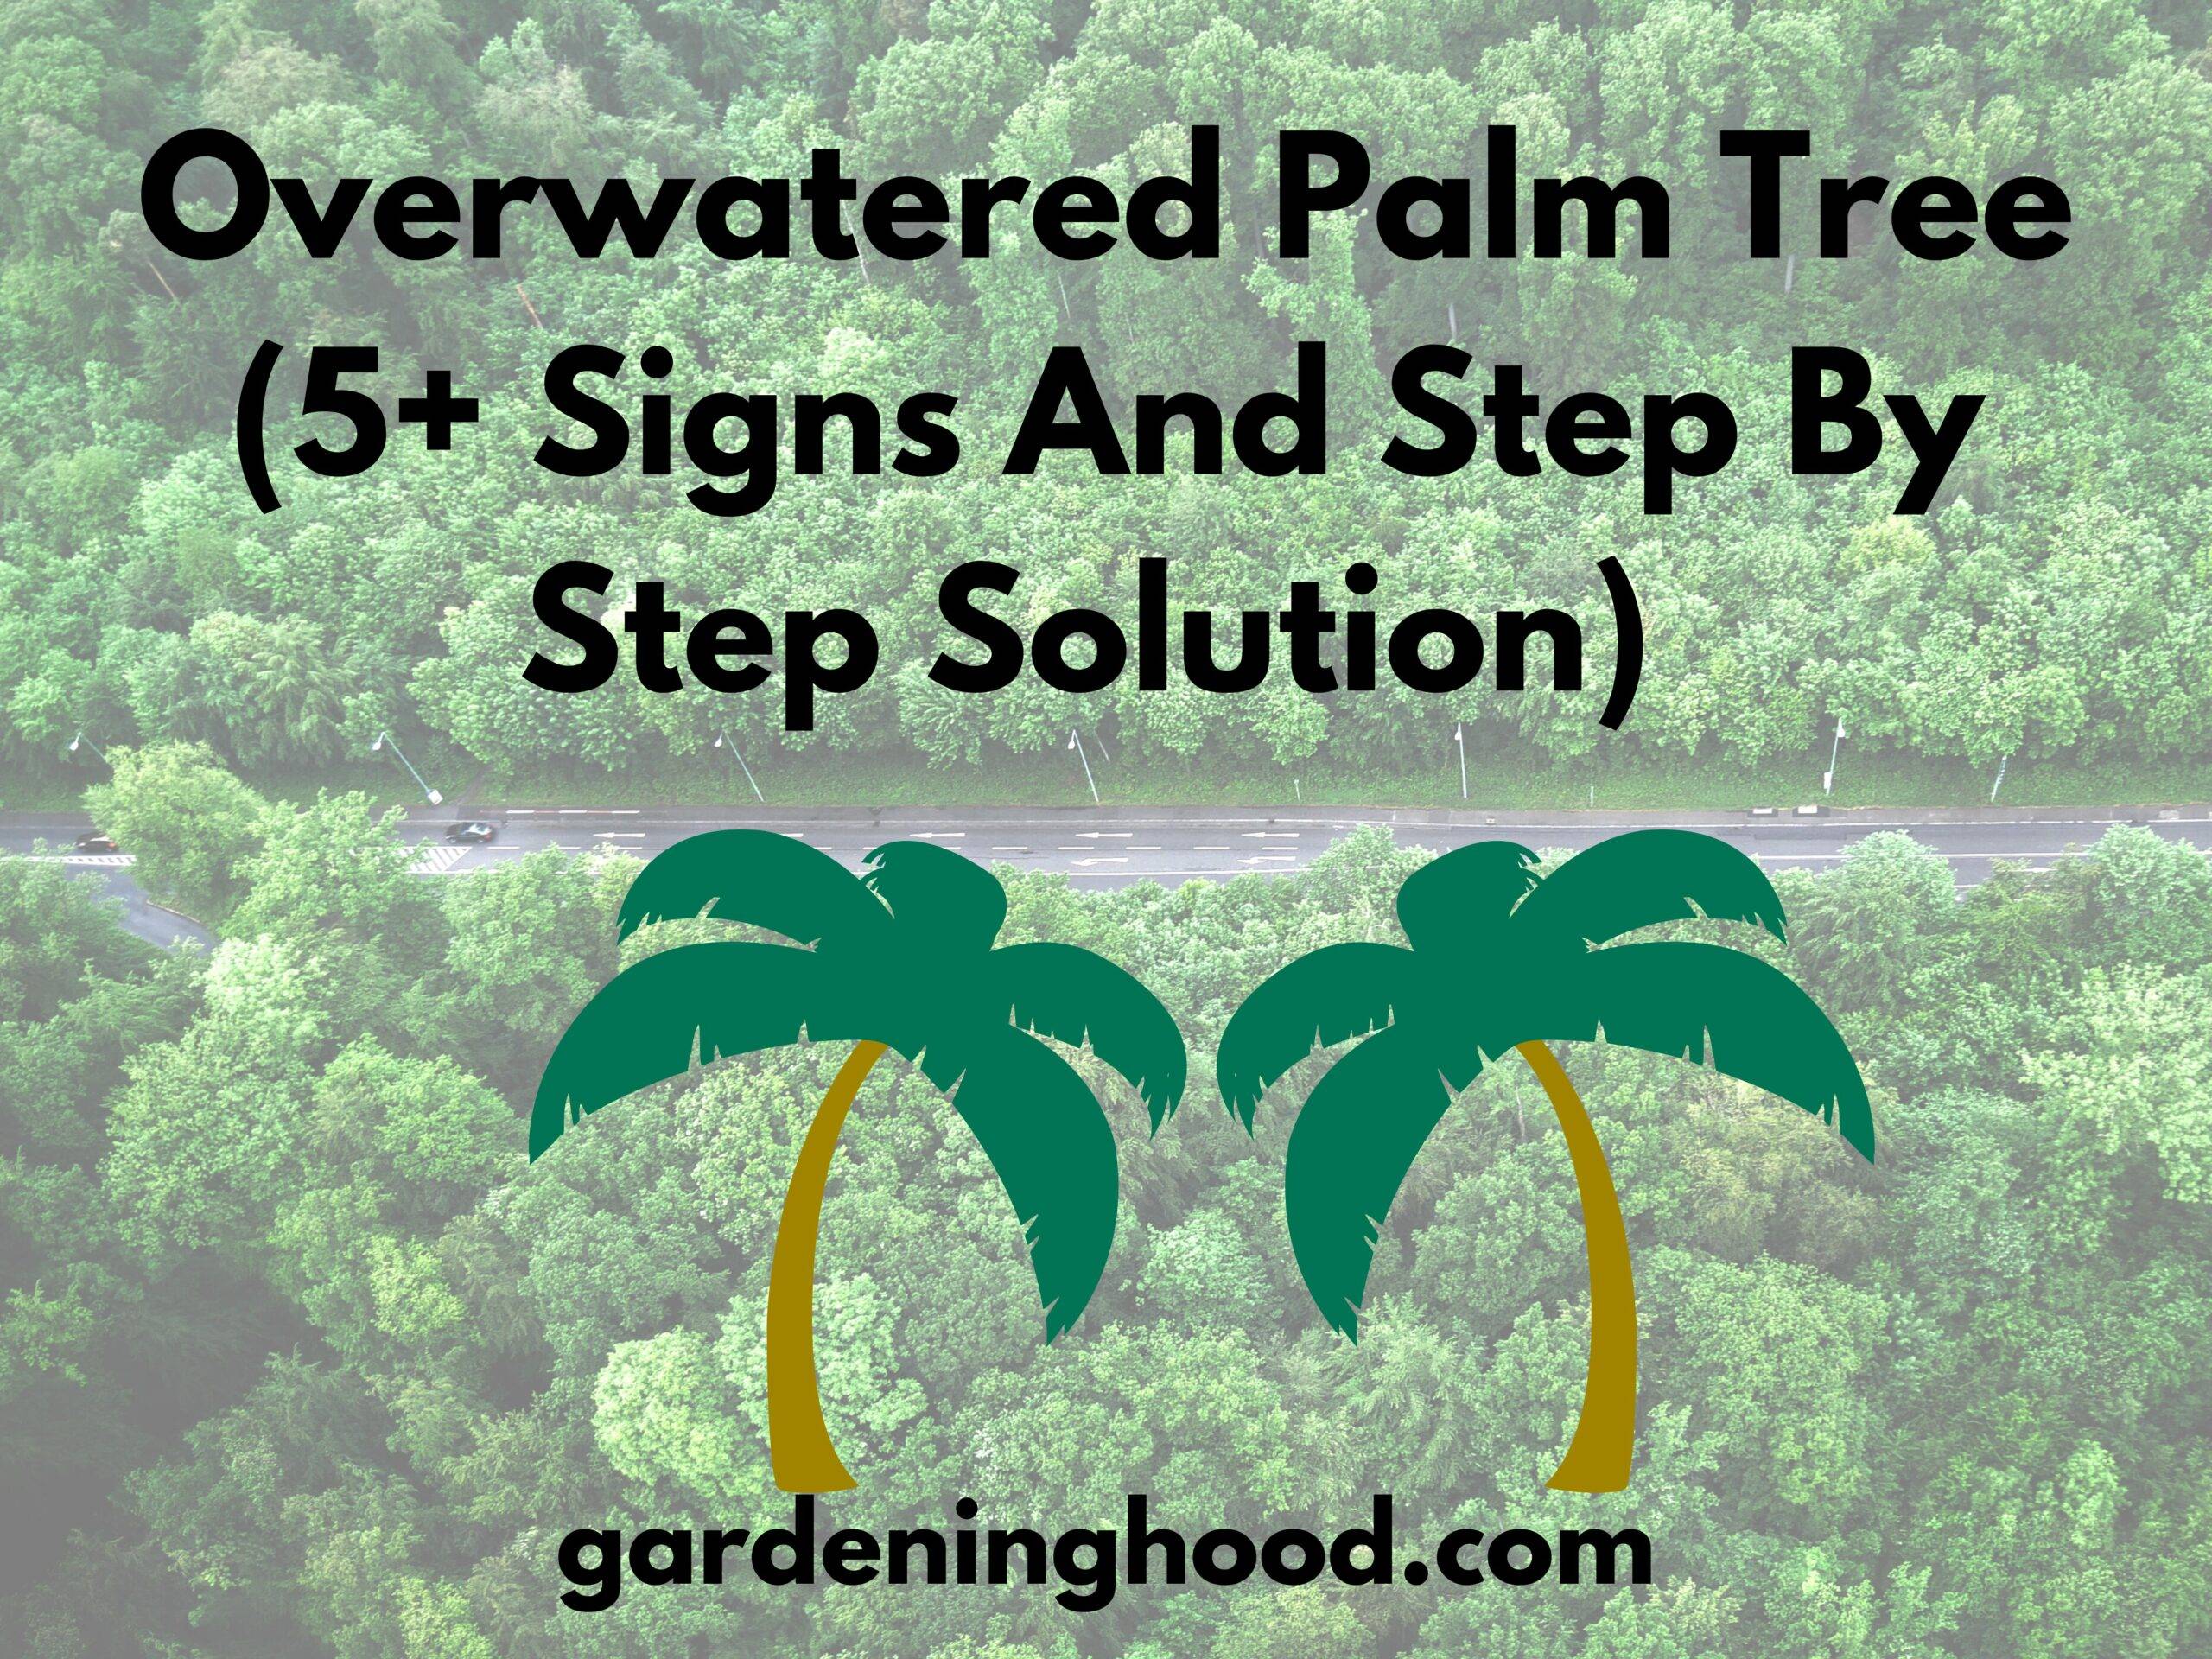 Overwatered Palm Tree (5+ Signs And Step By Step Solution)